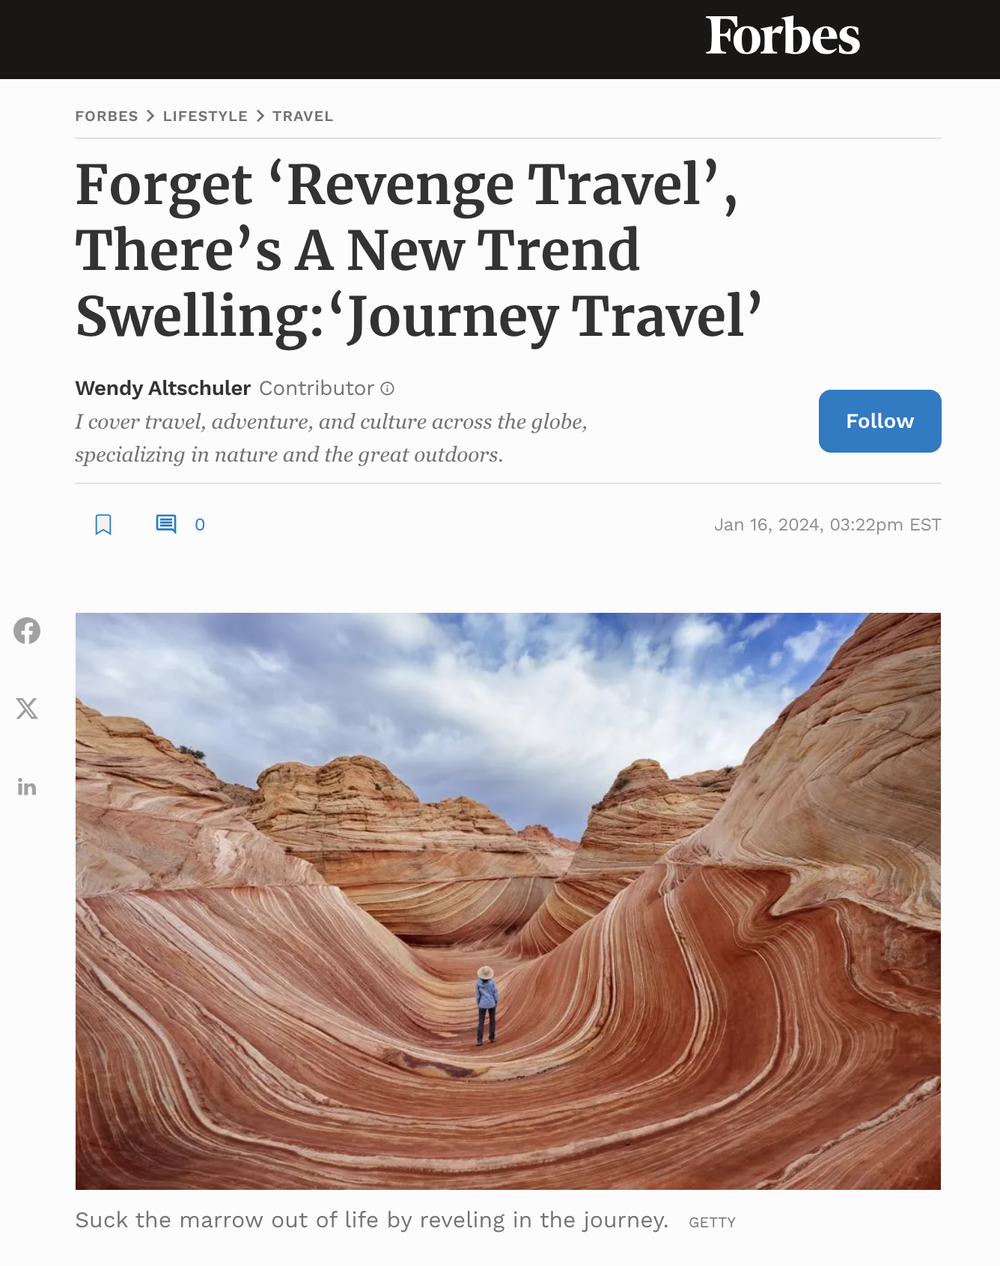 Forget ‘Revenge Travel’, There’s A New Trend Swelling:‘ Journey Travel’